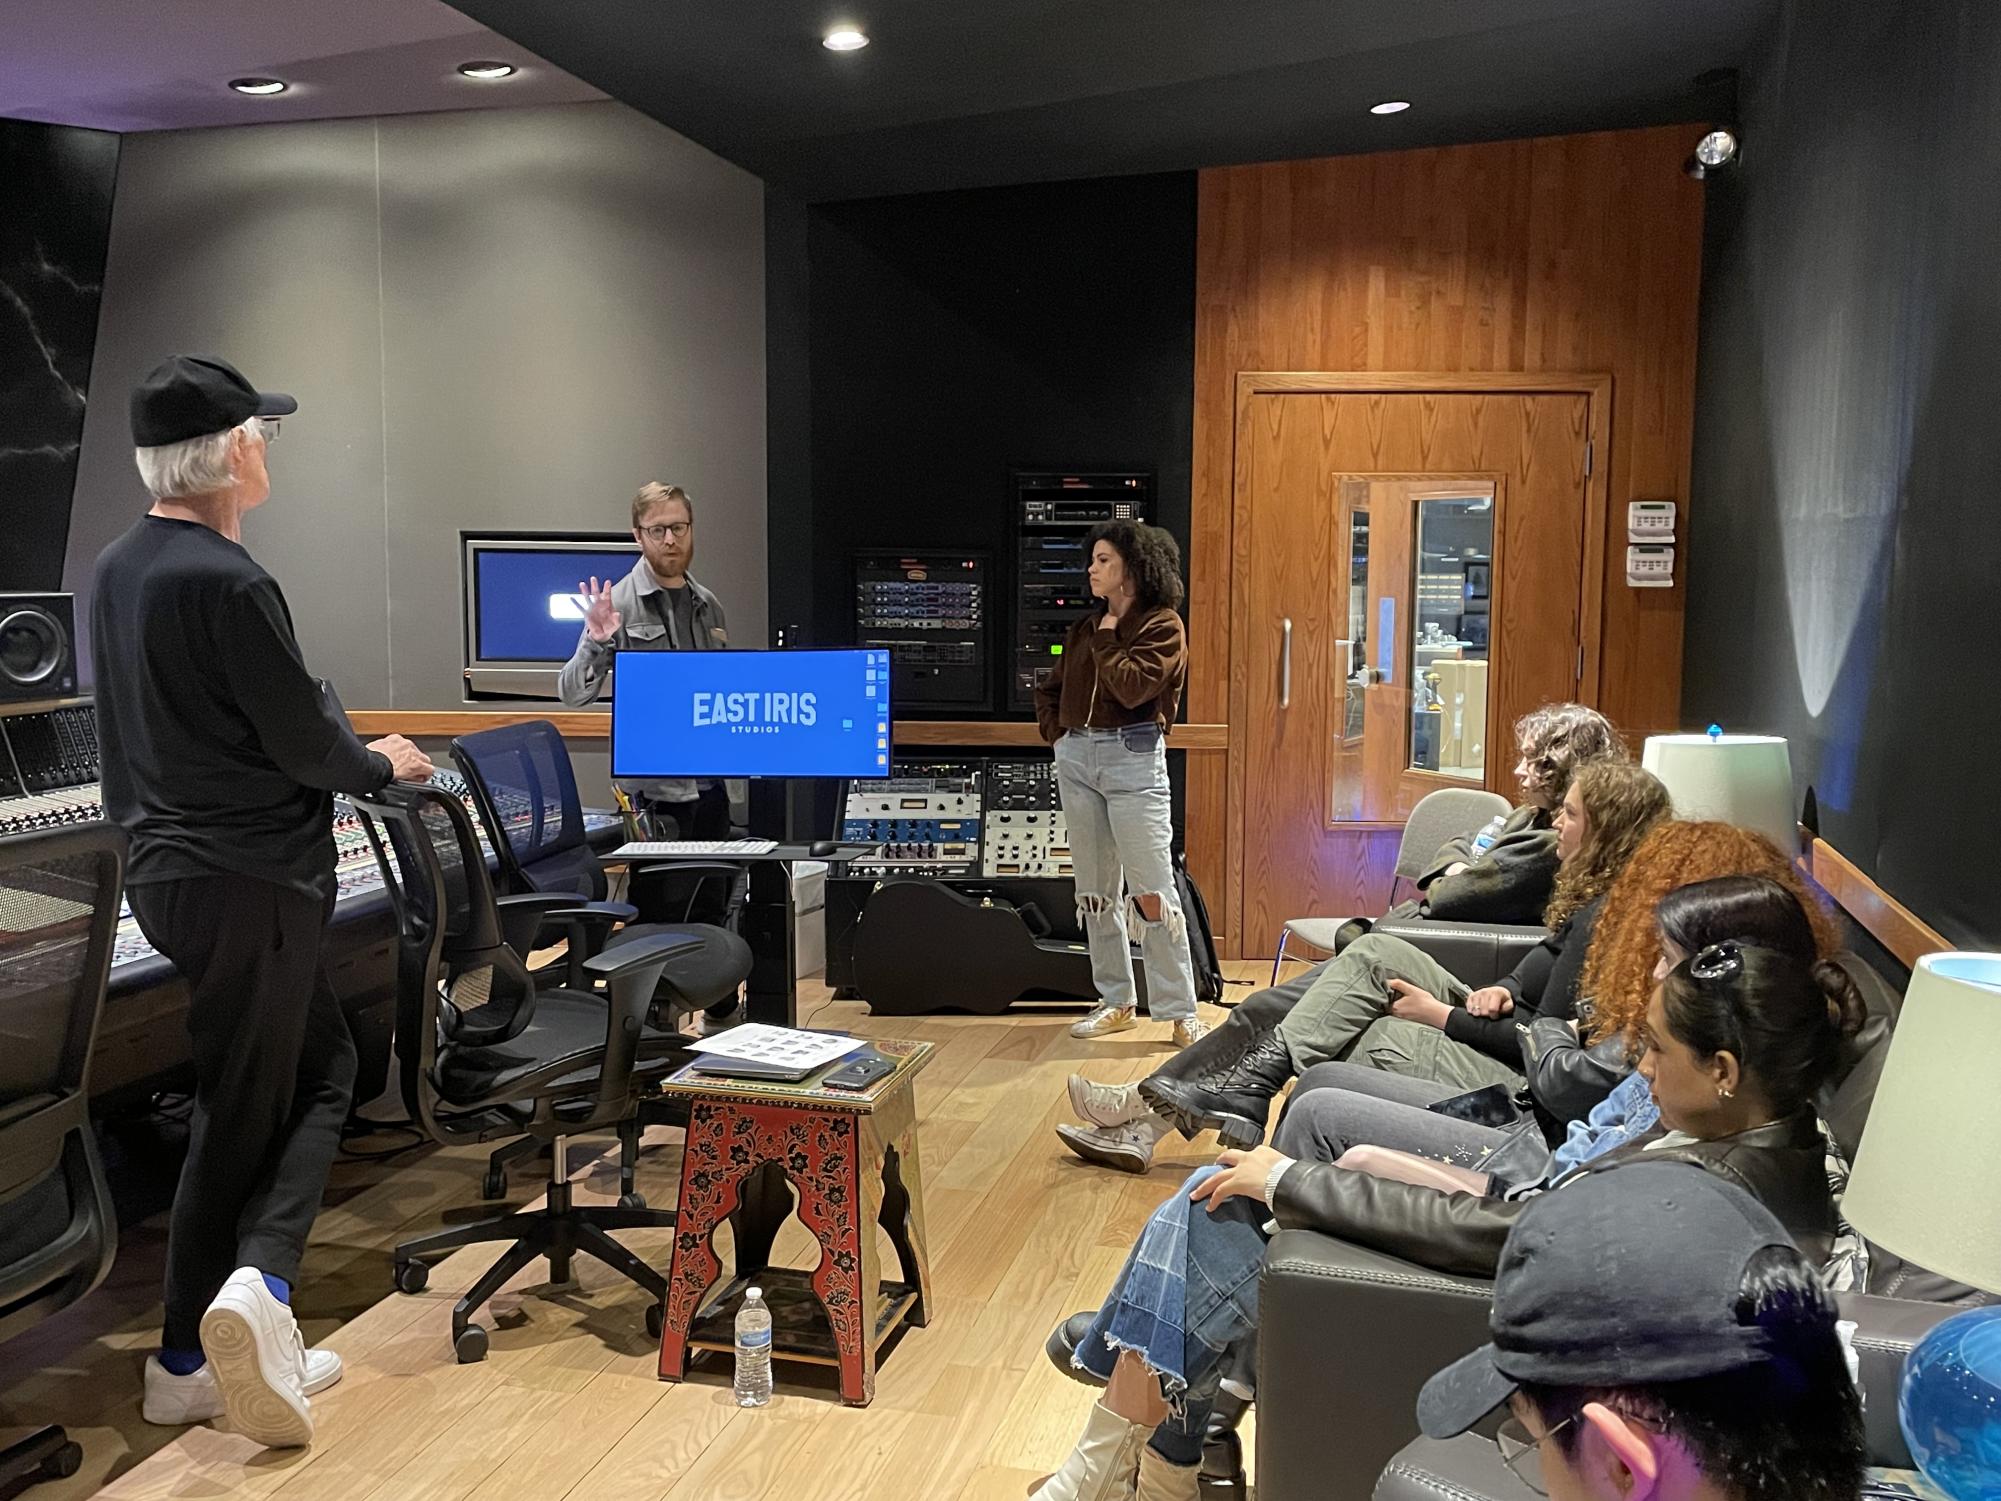 A group of students sitting in a music recording studio while listening to two instructors speaking. The room is filled with various music production equipment.